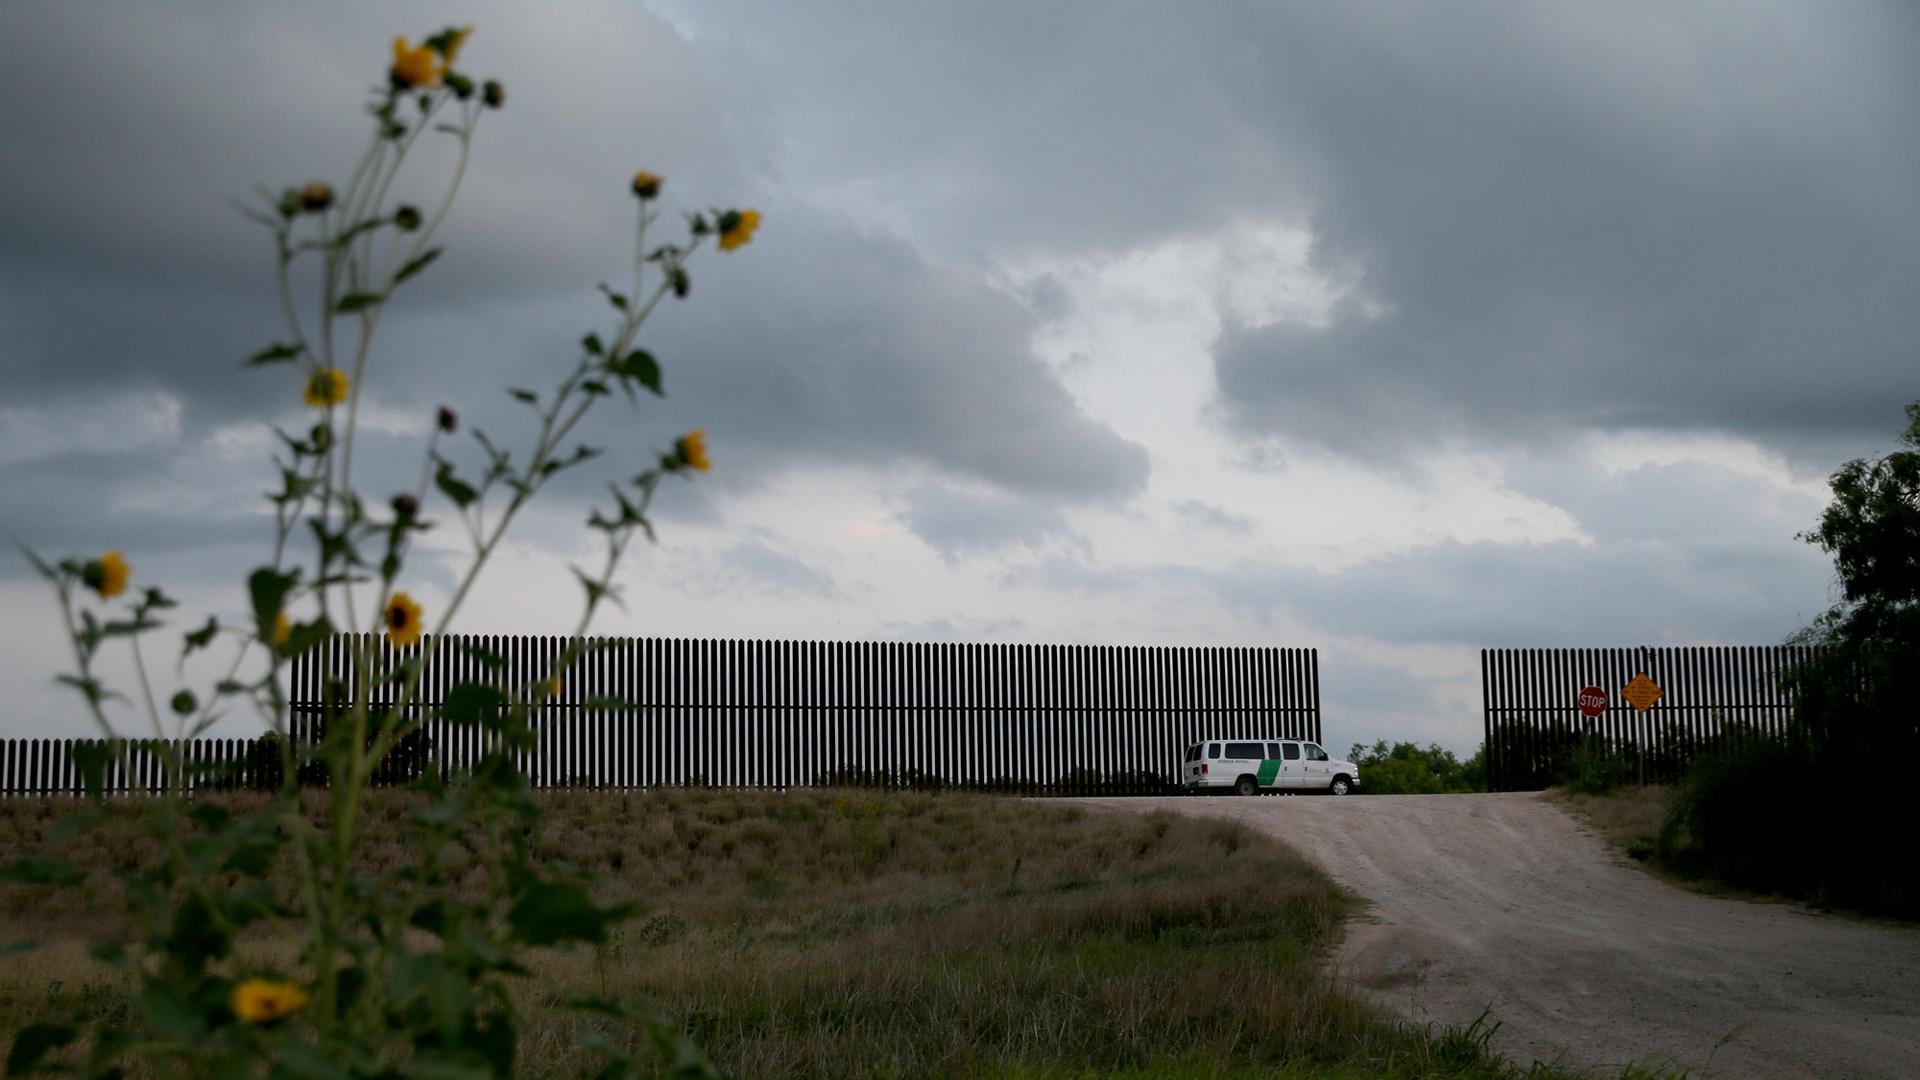 A white truck is parked between gaps in a fence against a sky of grey clouds.